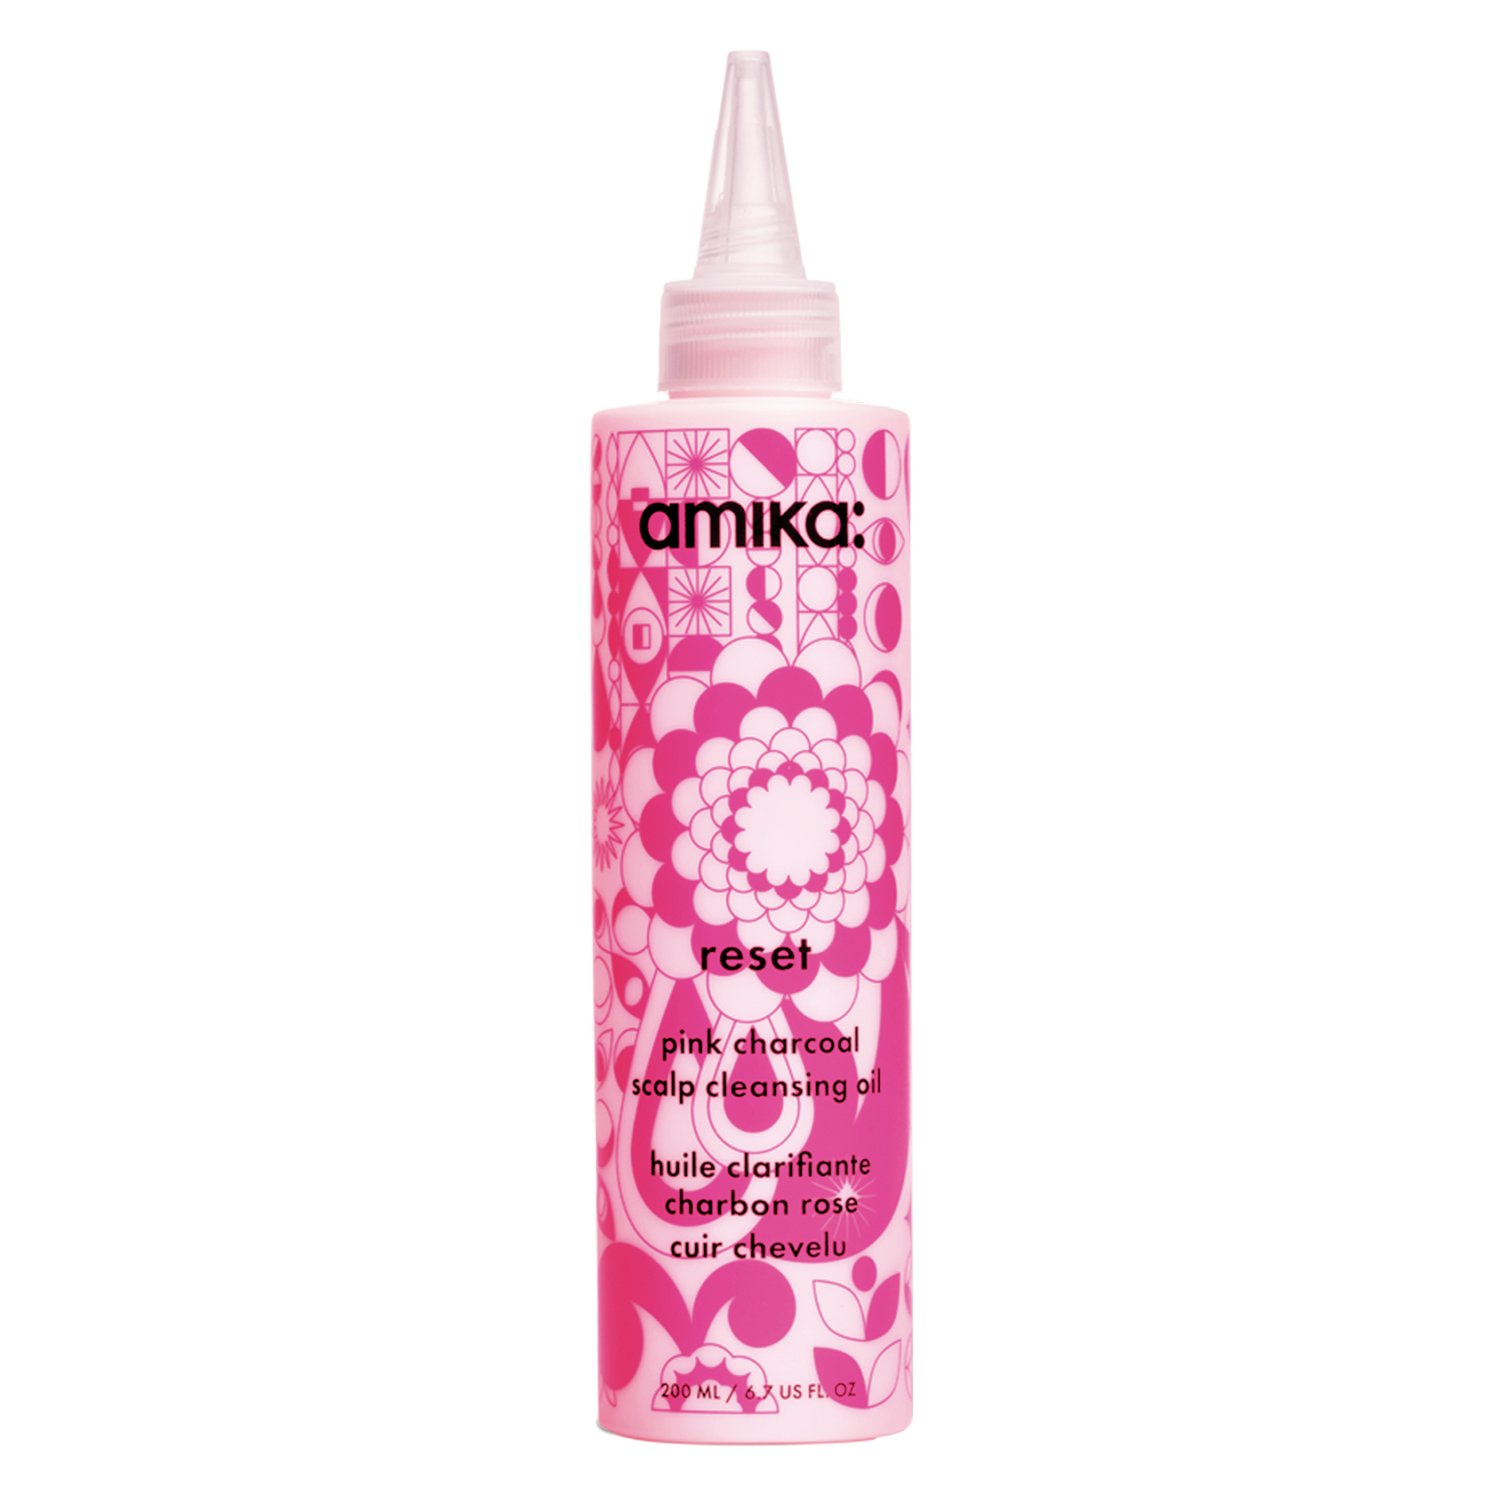 amika RESET pink charcoal scalp cleansing oil  1